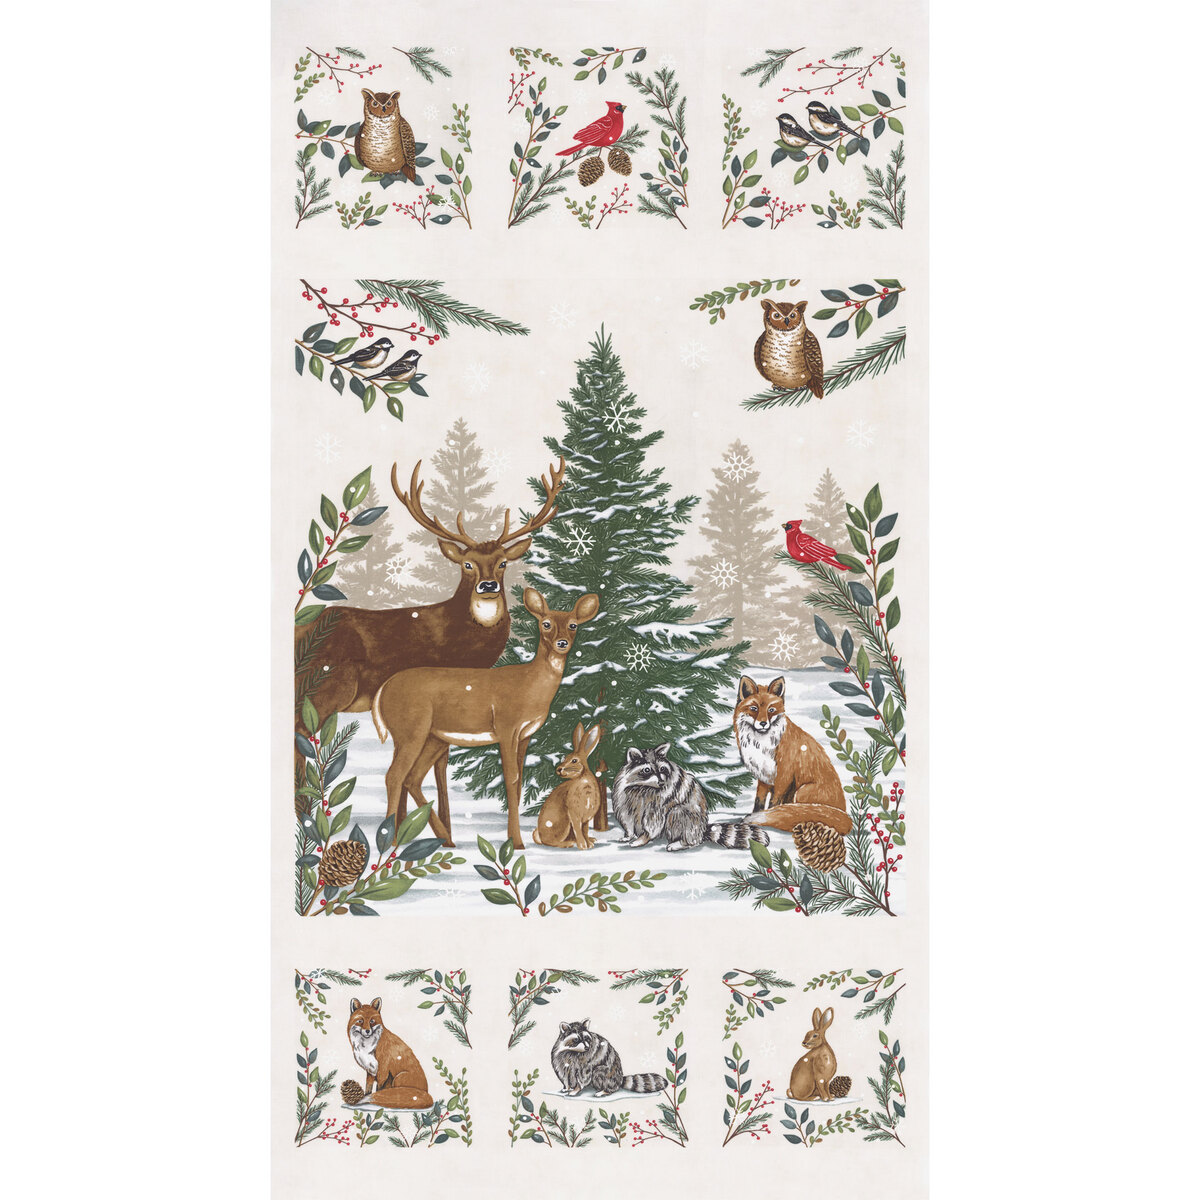 Holidays at Home Snowy White Snowflakes Fabric 56077 21 – Serendipity Woods